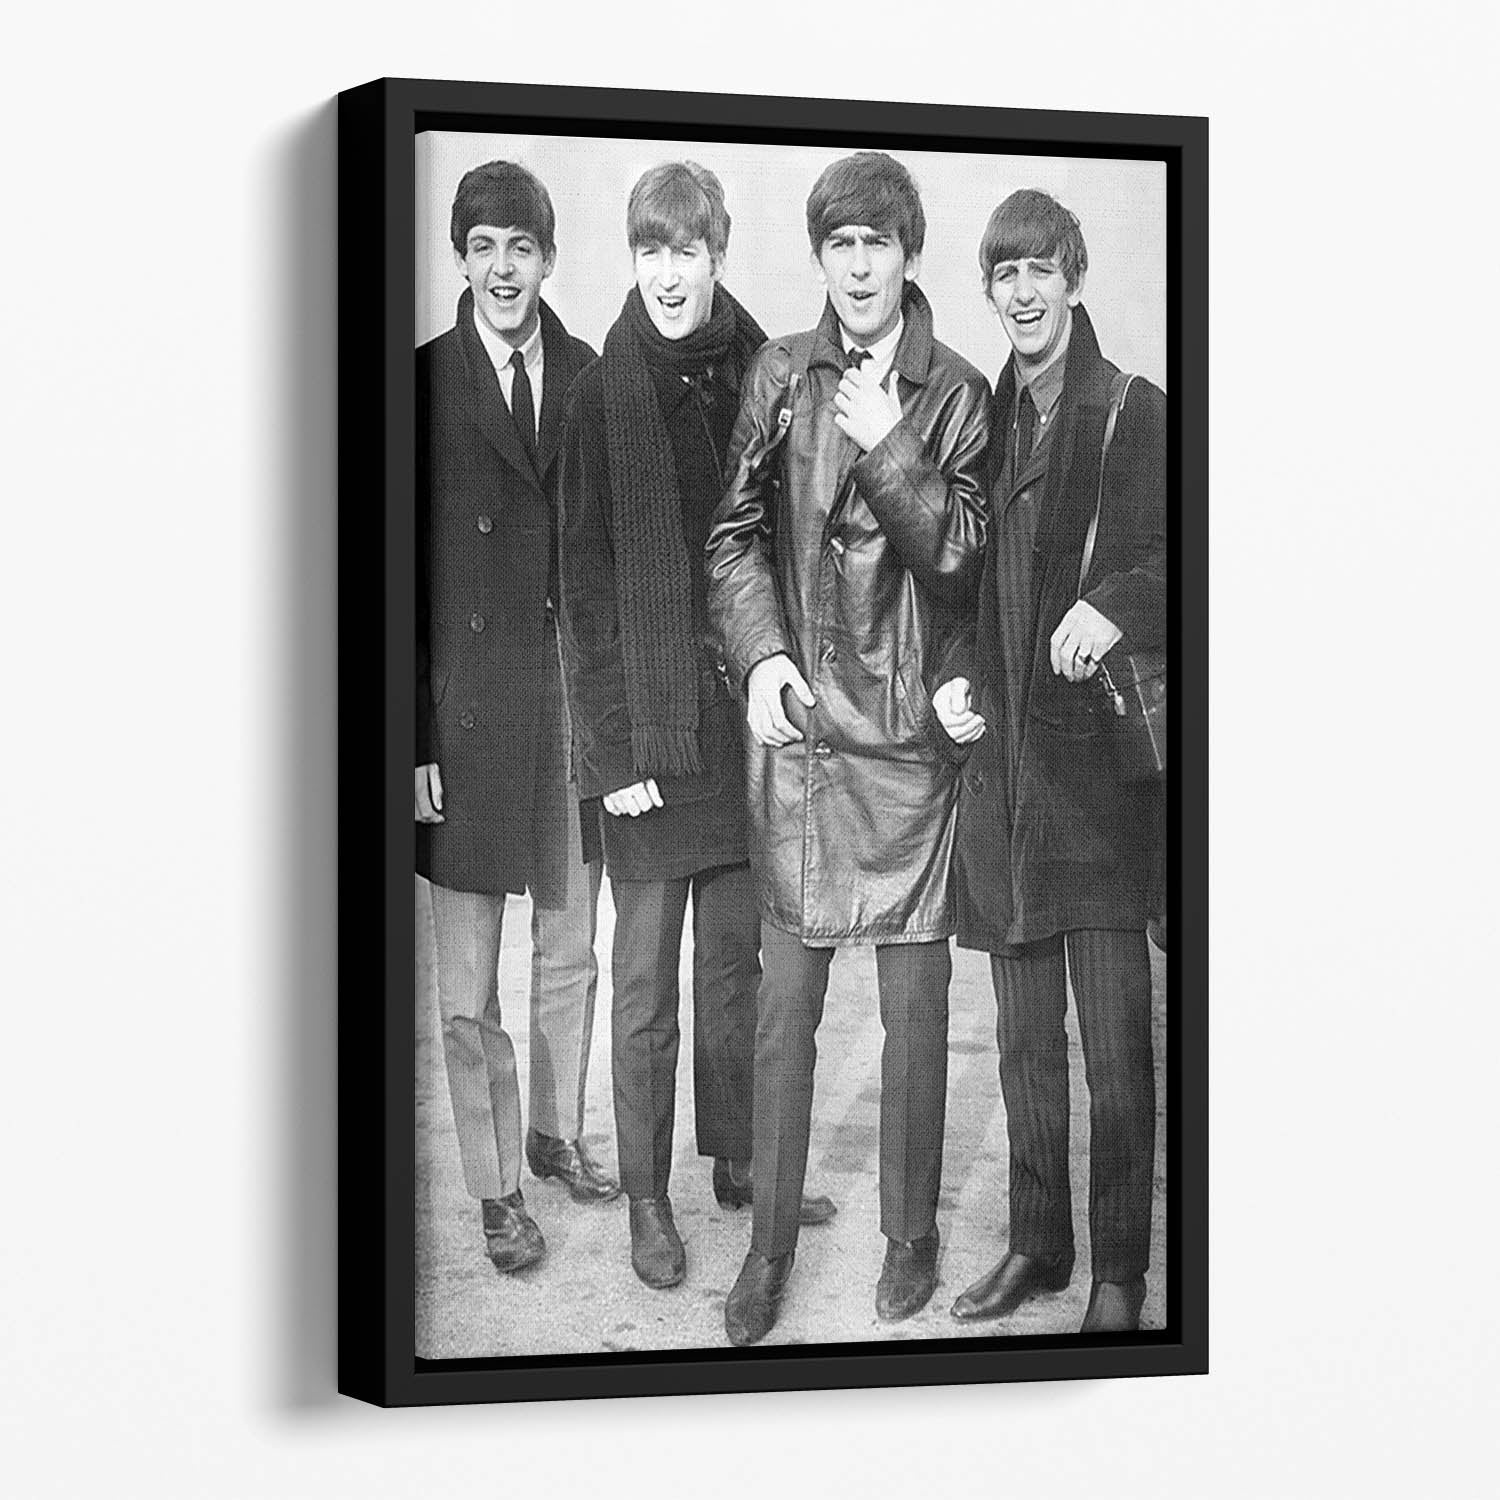 The Beatles in overcoats in 1963 Floating Framed Canvas